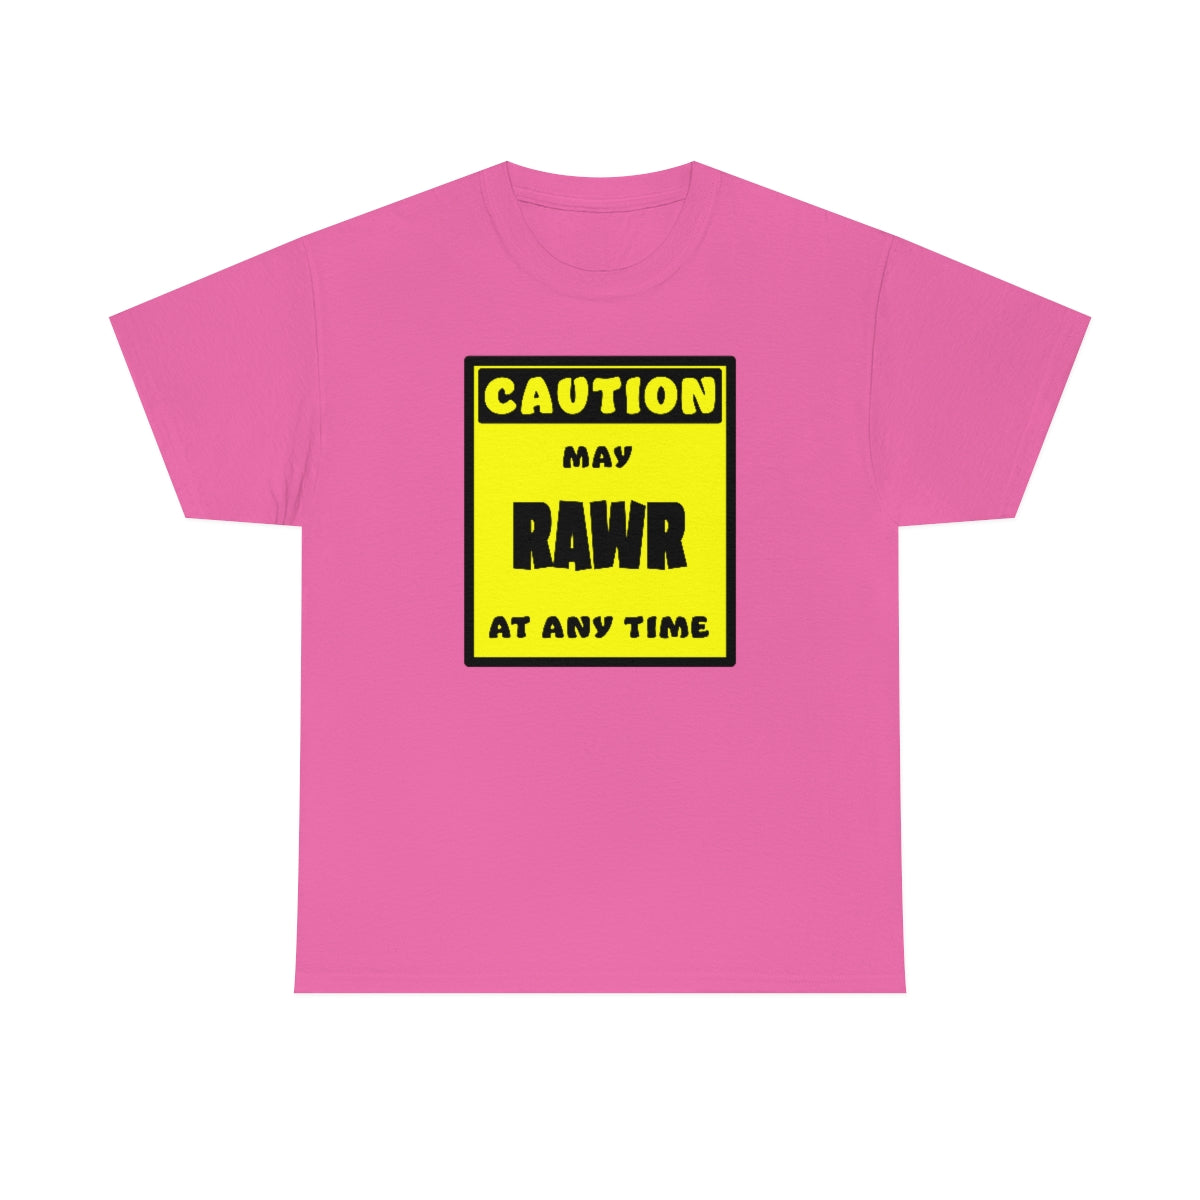 CAUTION! May RAWR at any time! - T-Shirt T-Shirt Artworktee Pink S 